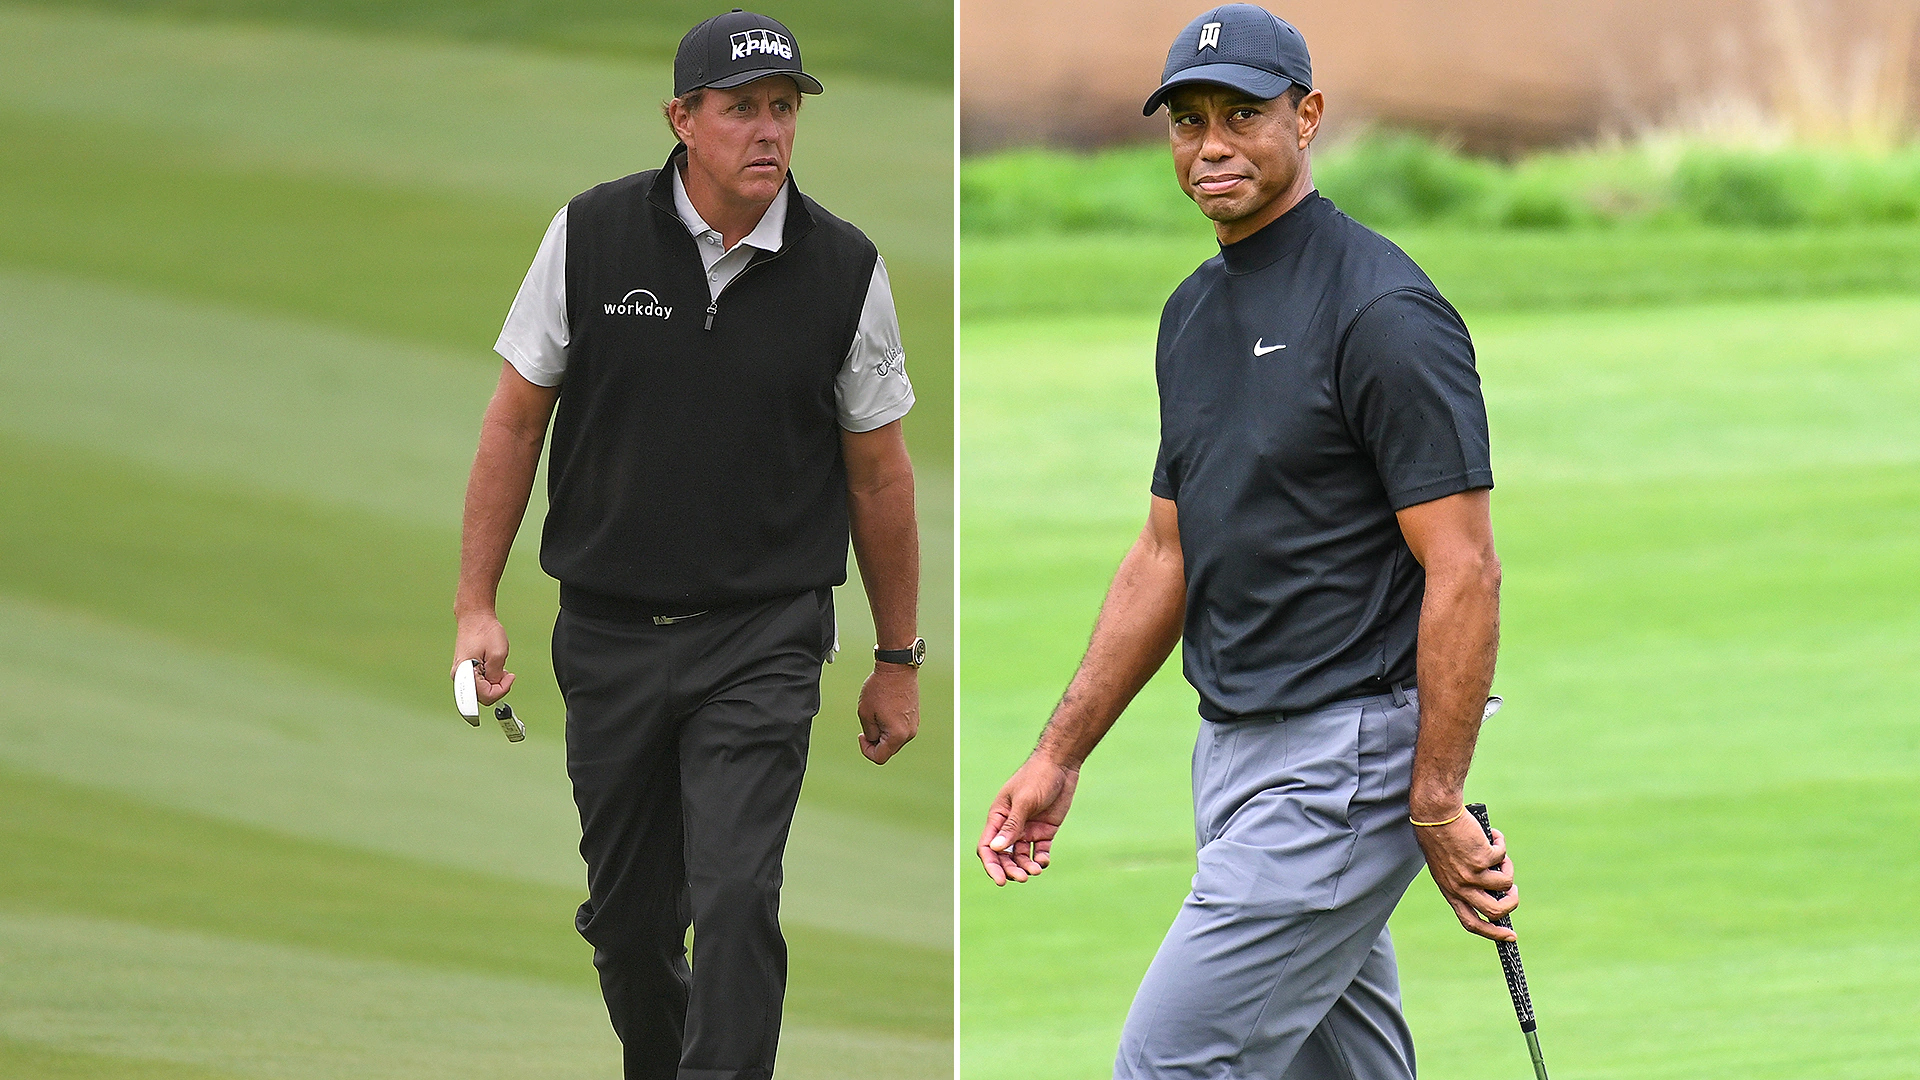 Tiger Woods vs. Phil Mickelson, head-to-head results on the PGA Tour